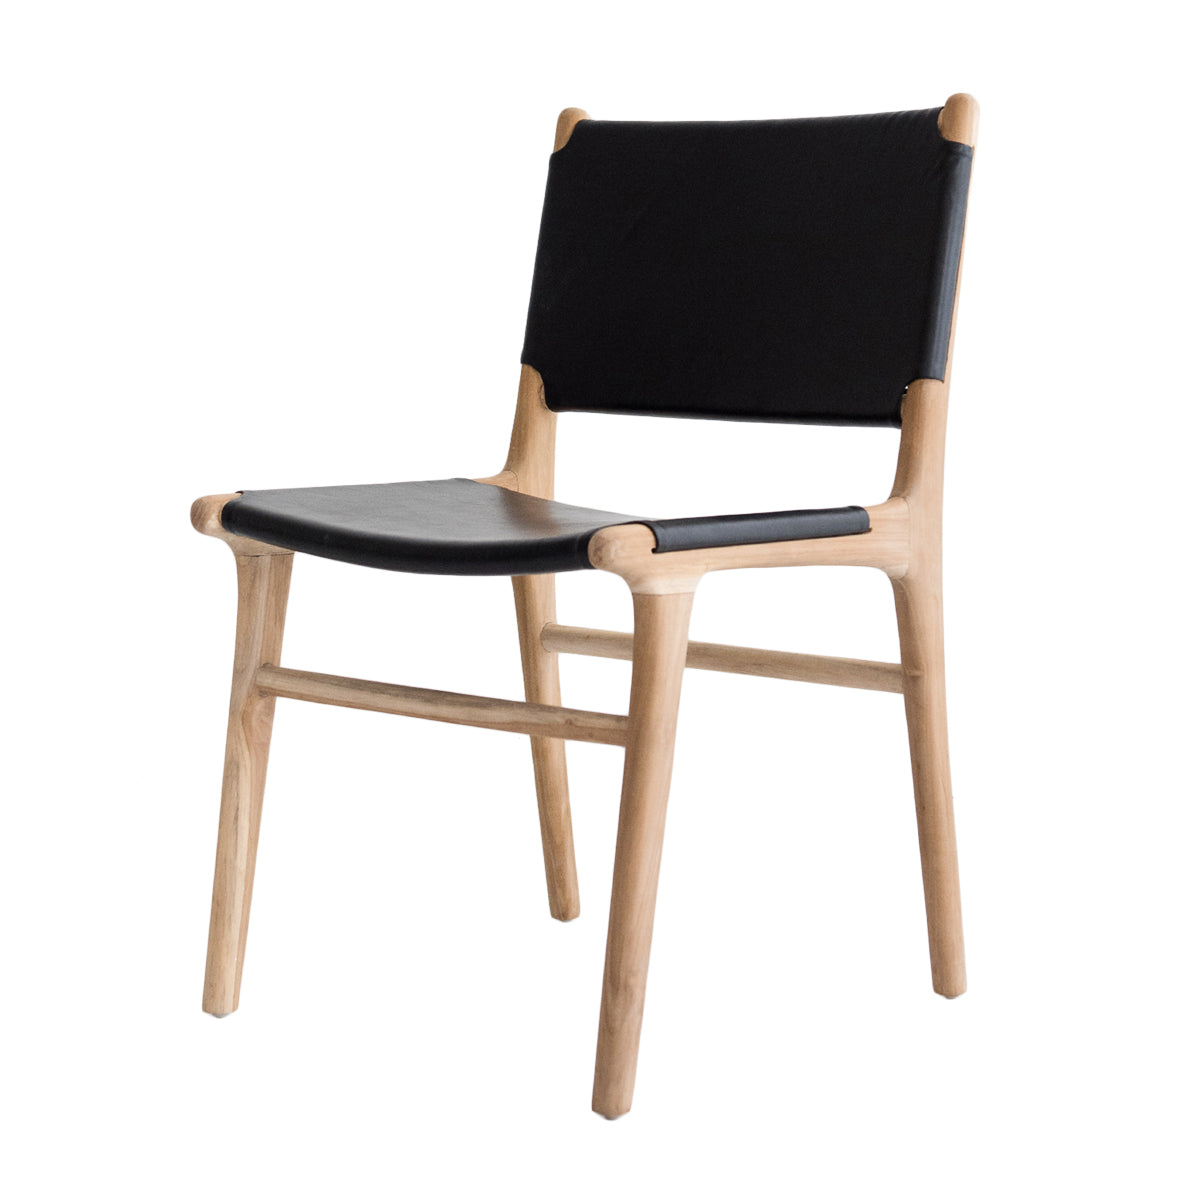 Bella Dining Chair - Black Leather